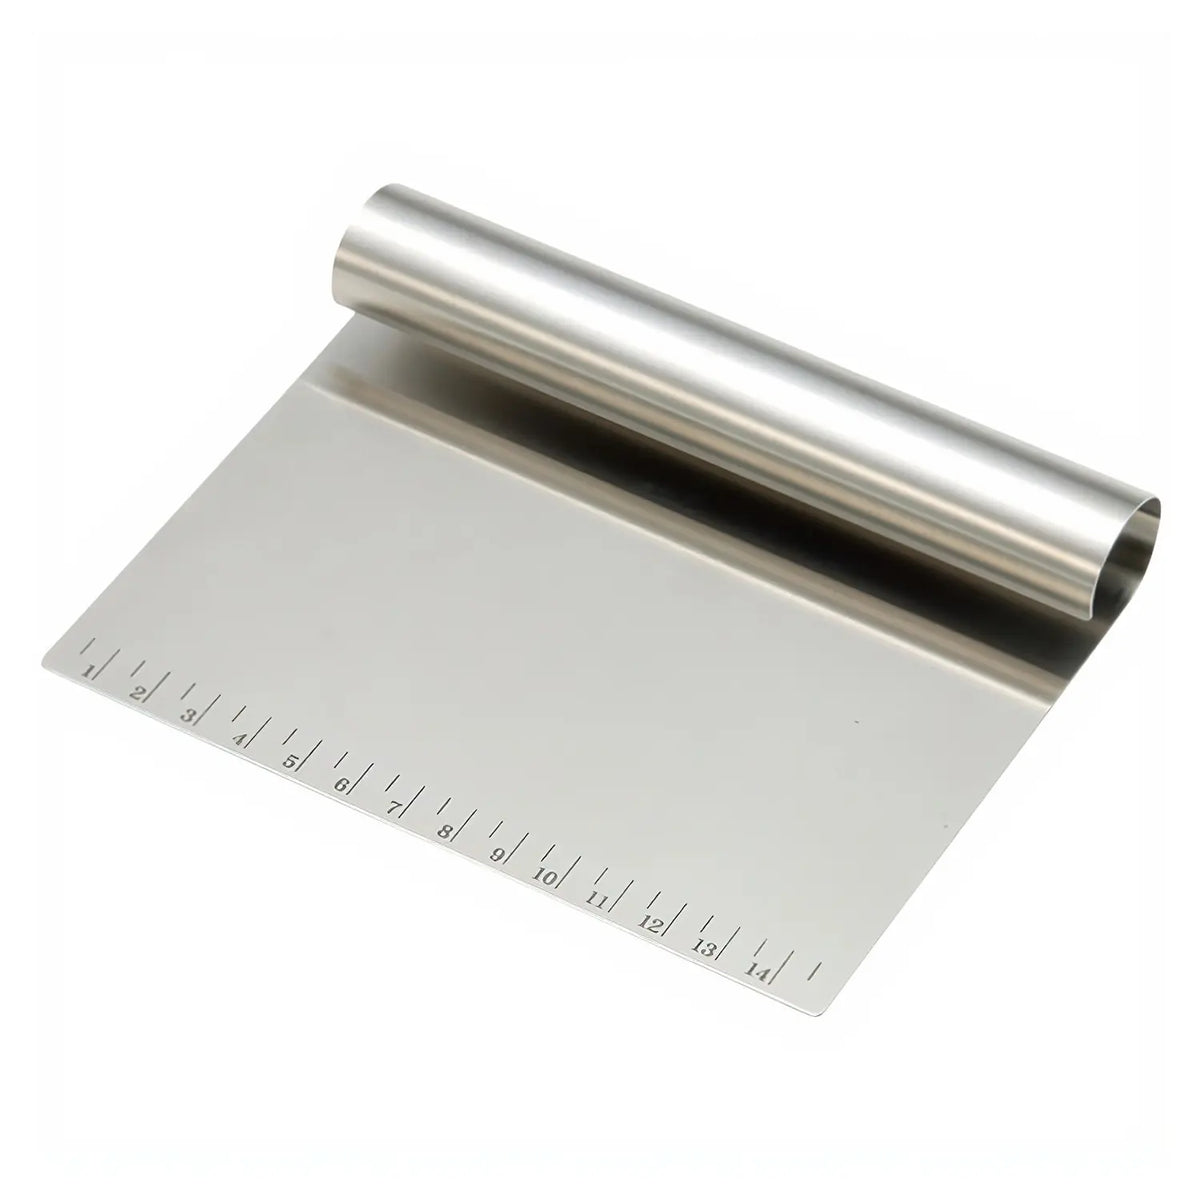 TIGERCROWN Cake Land Stainless Steel Bench Scraper with Scale -  Globalkitchen Japan